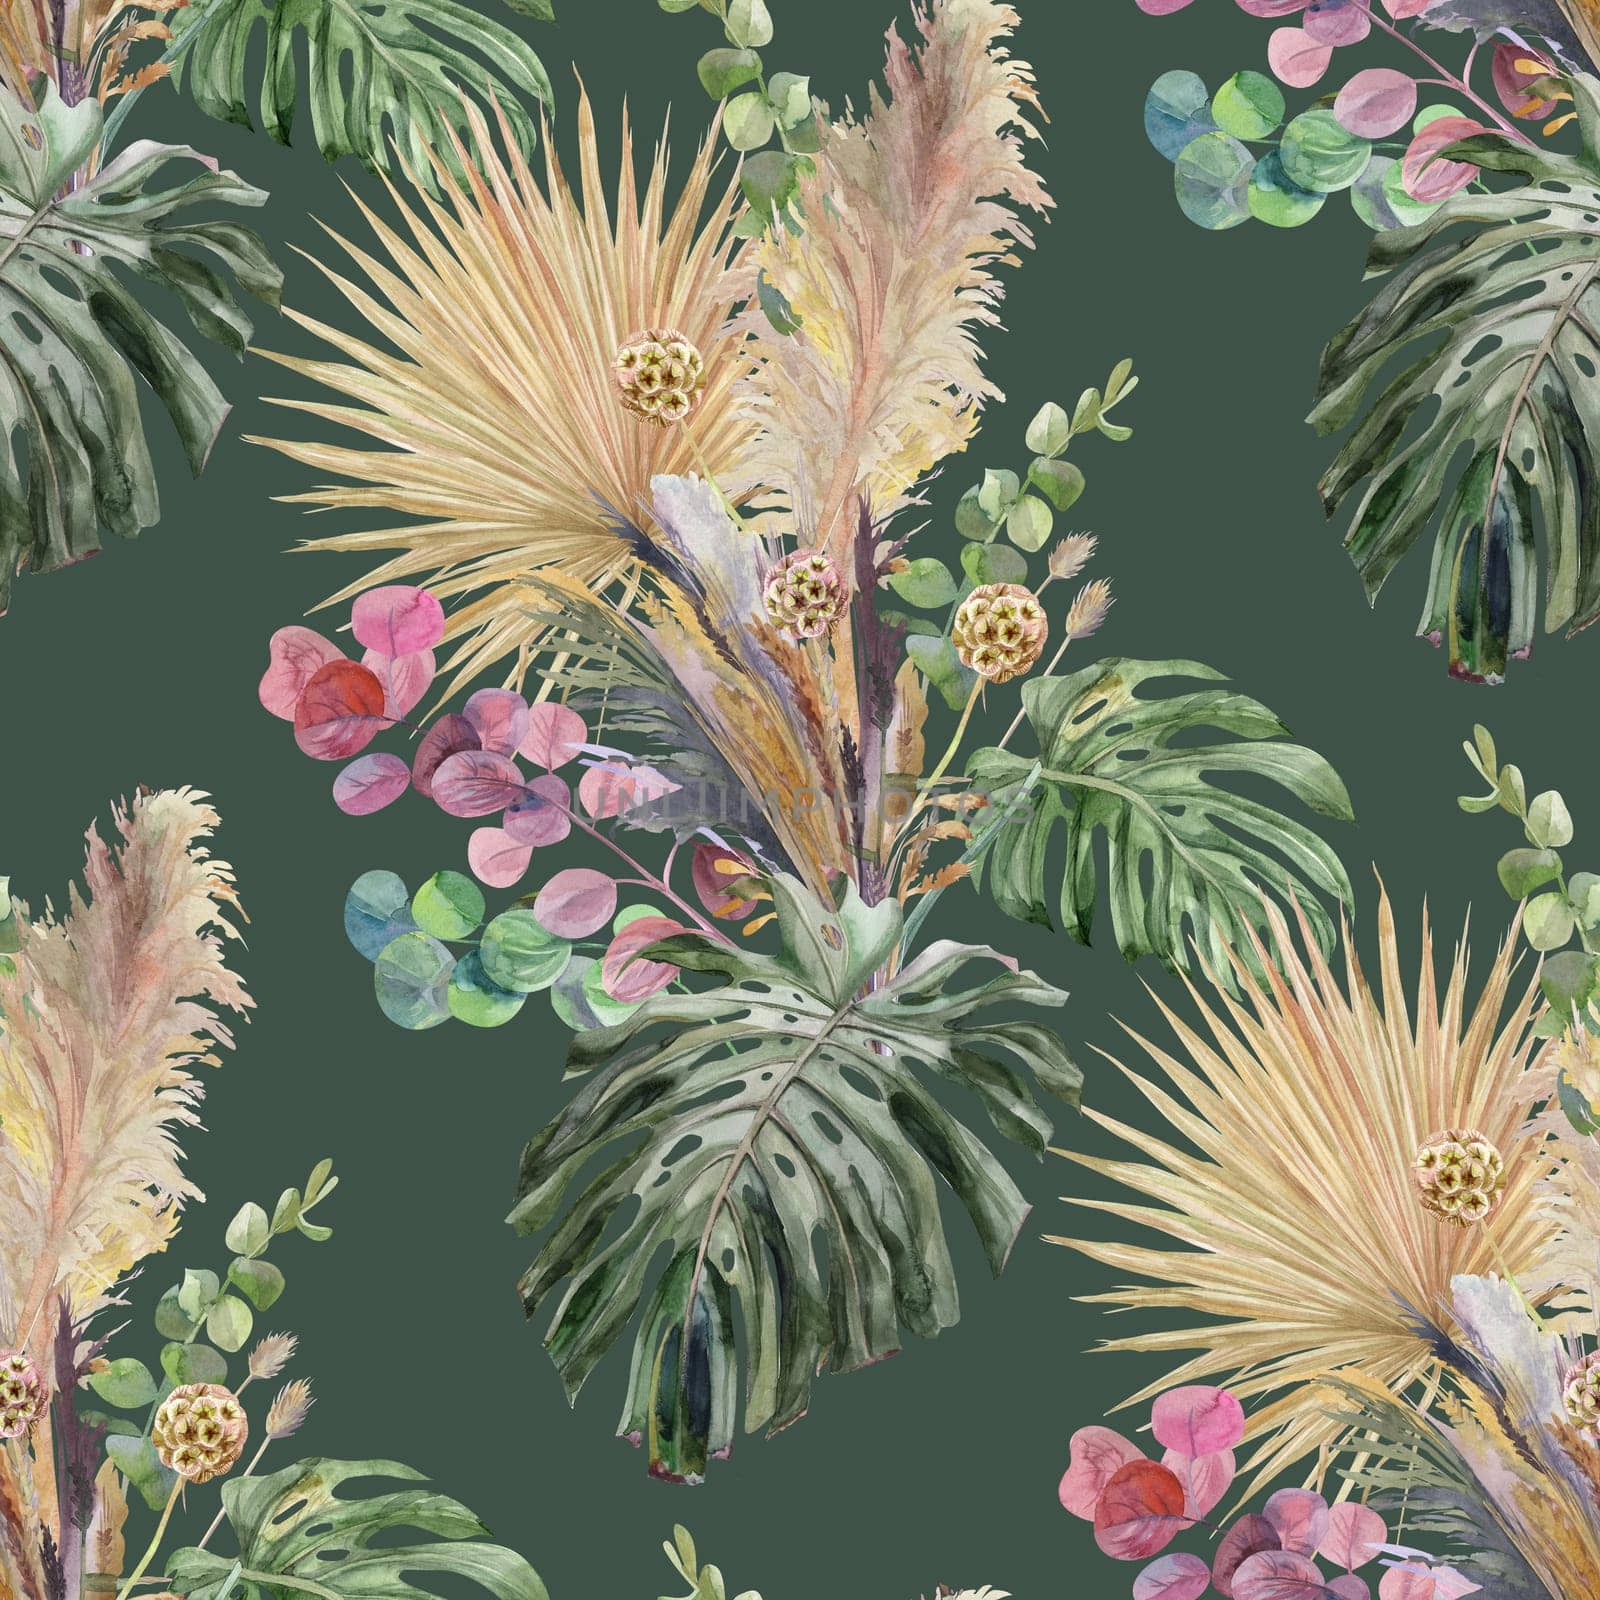 Summer seamless pattern with a bouquet of tropical dried flowers and monstera leaves painted in watercolor on a green background